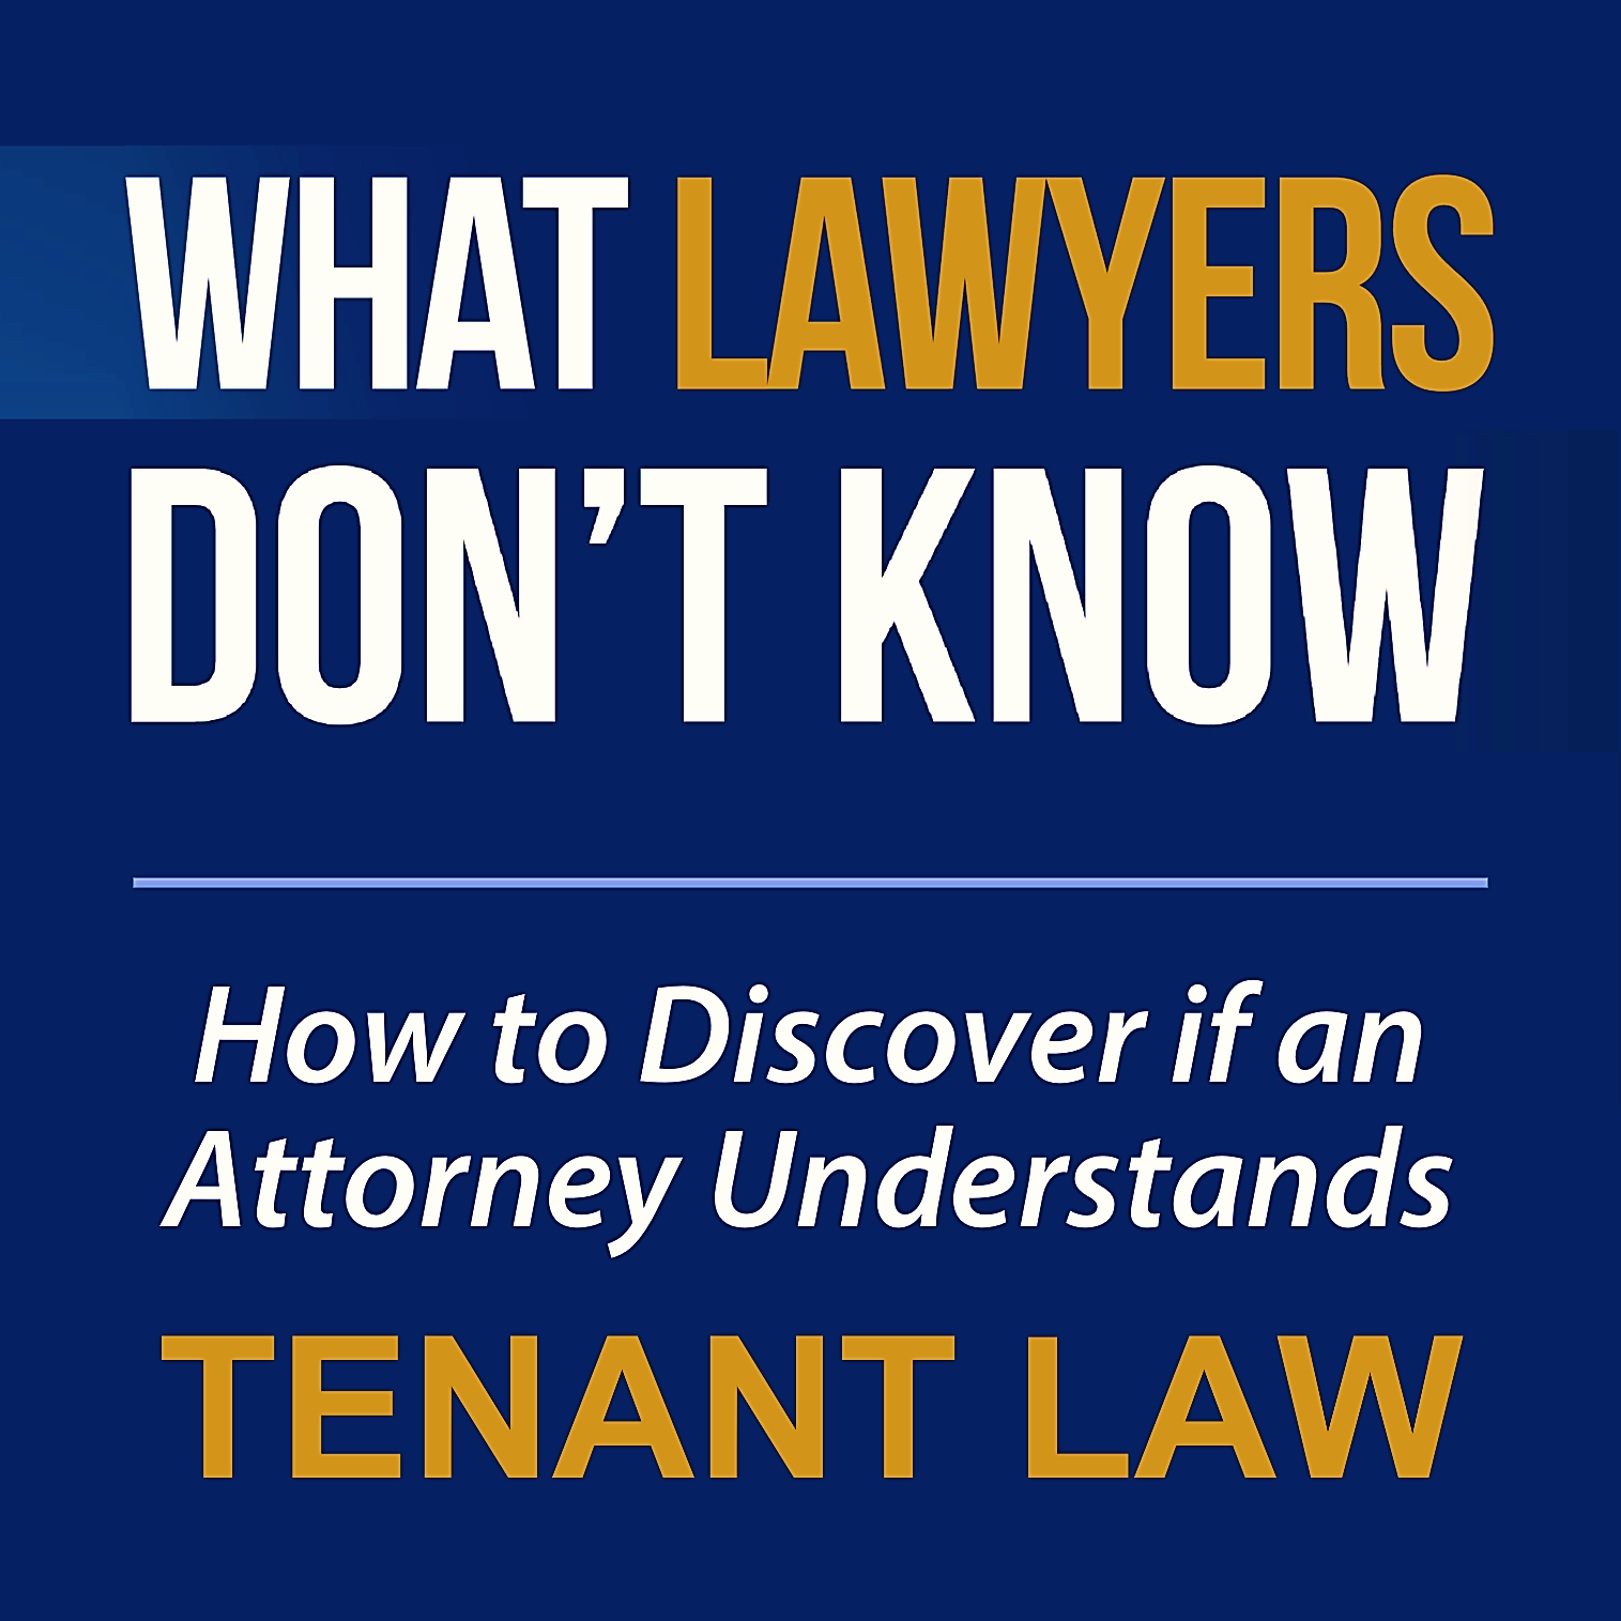 What Lawyers Don't know How to discover if an attorney understands tenant law